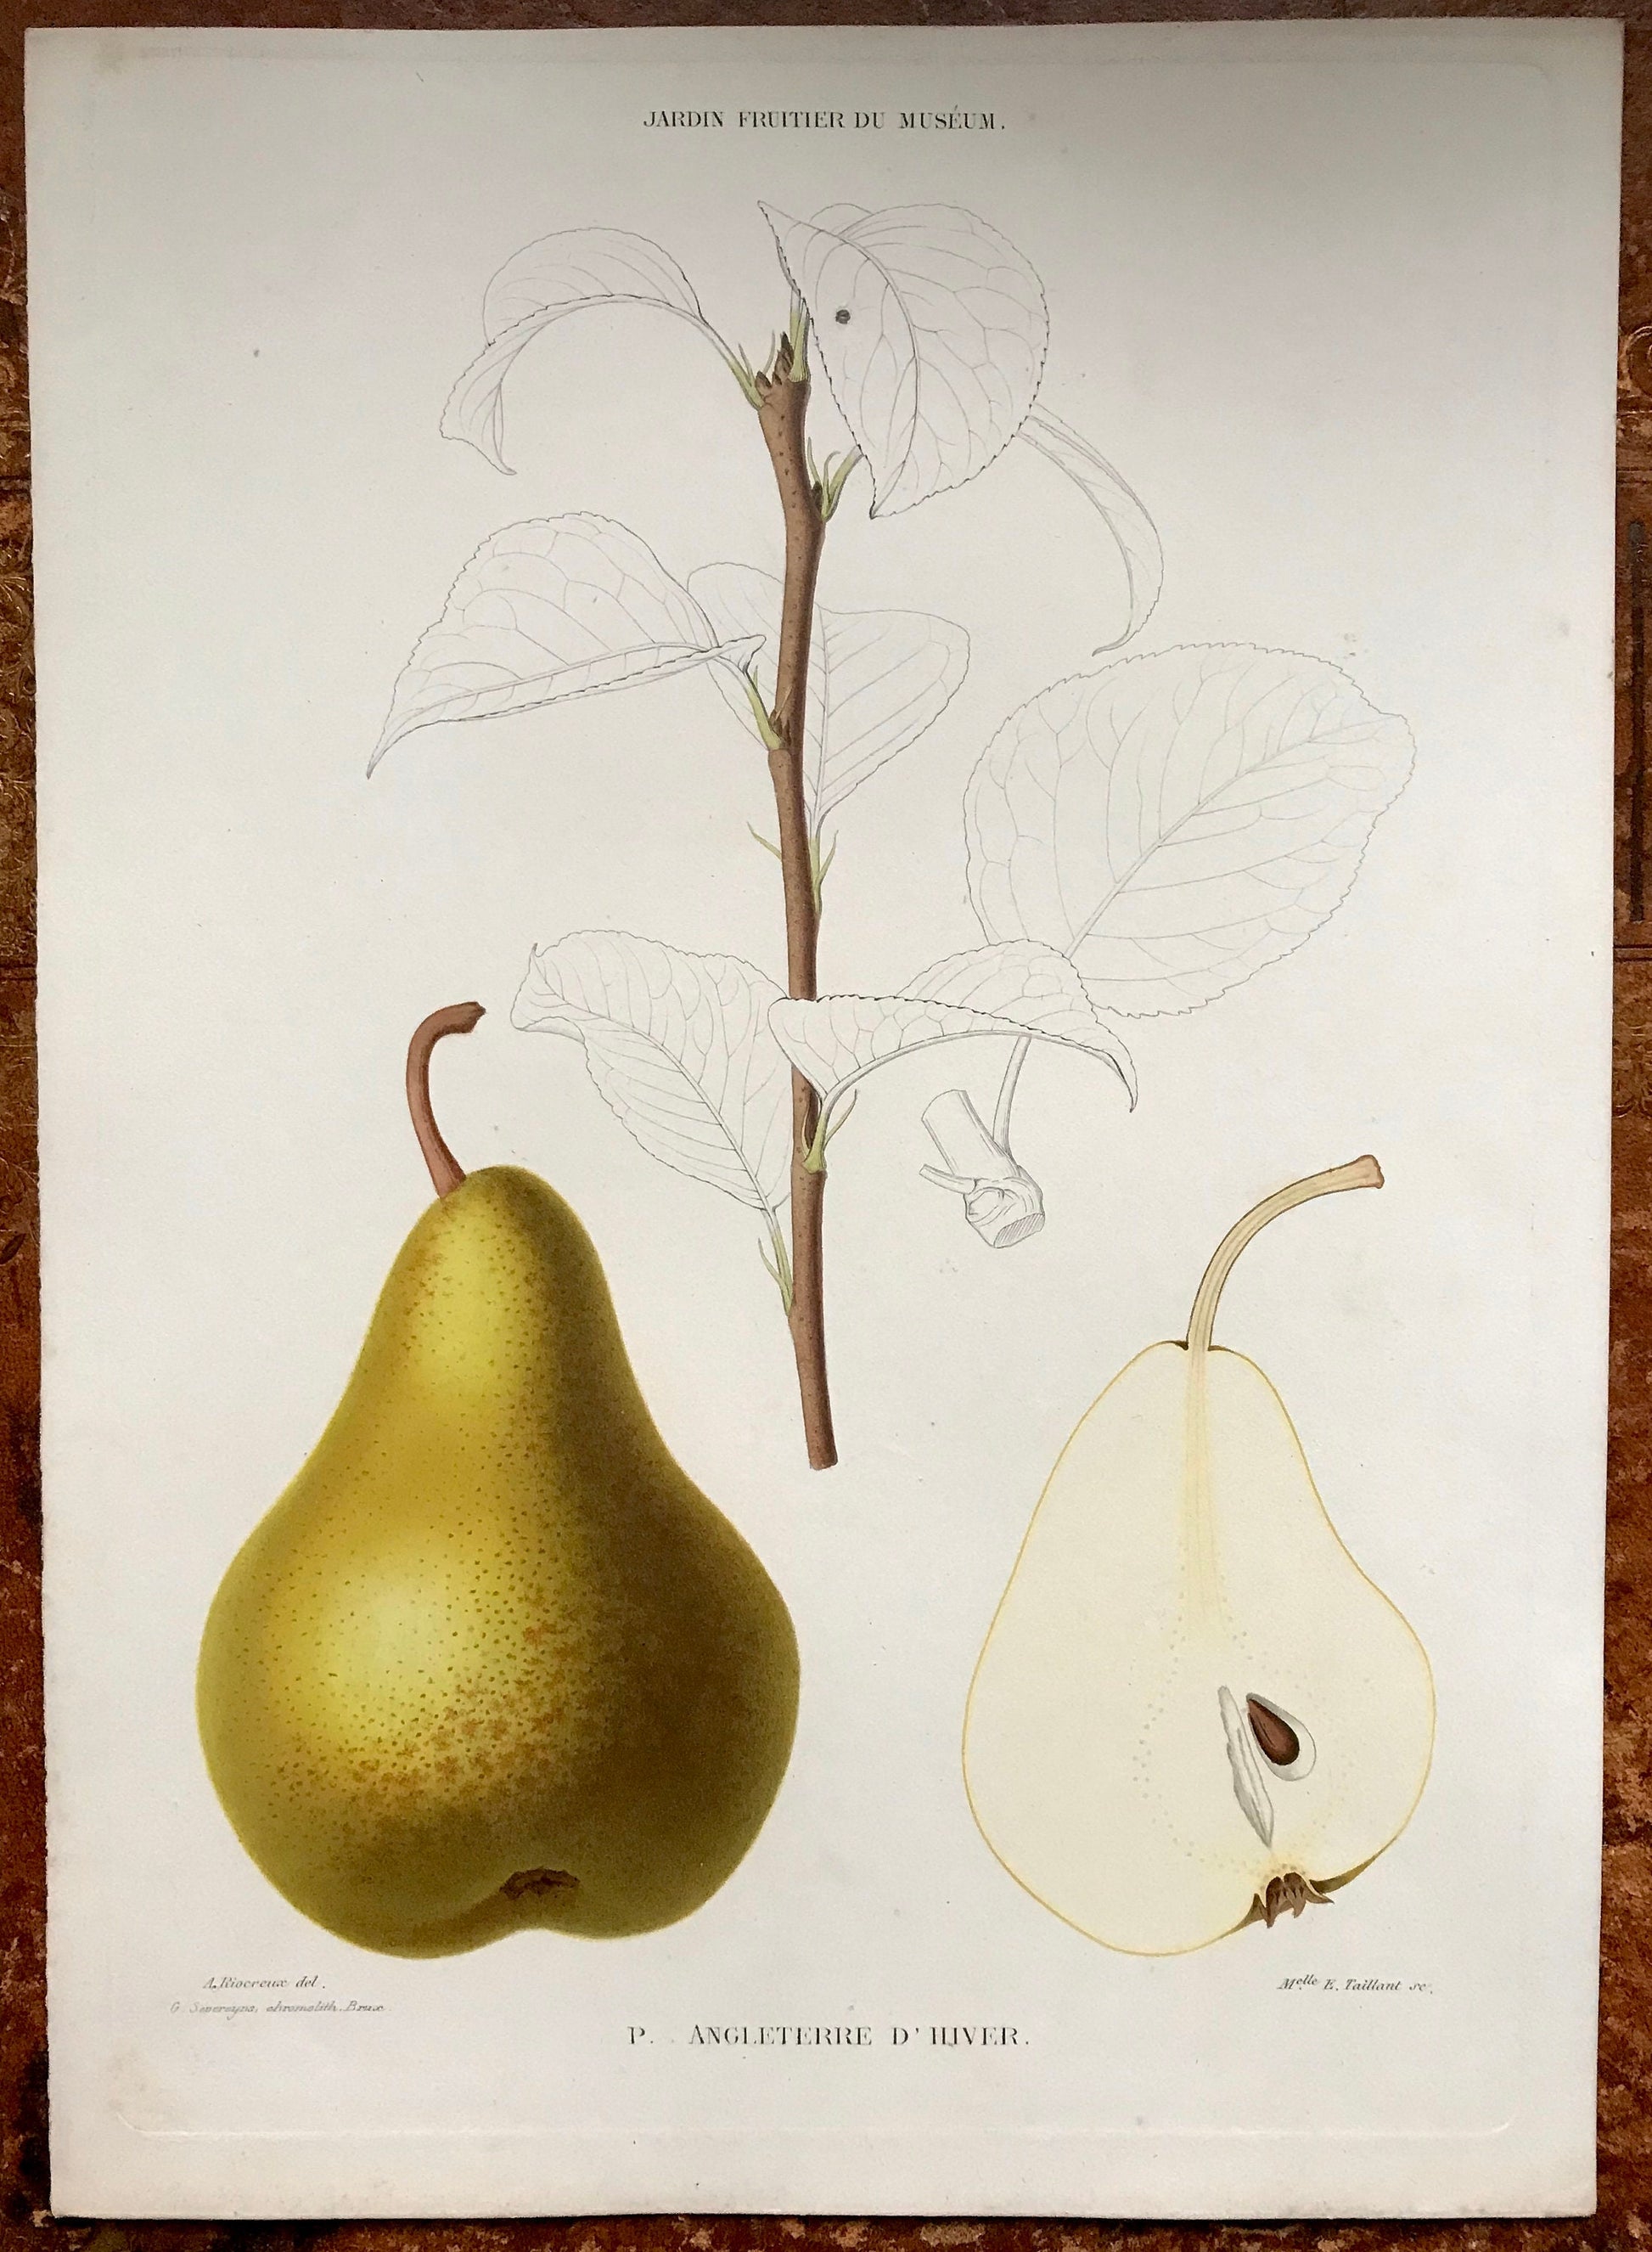 A Set of 6 Original Steel Engravings of Pears. French c. 1865. From Le Jardin Fruitier du Museum by Decaisne. 31.5 x 22.5 cms.